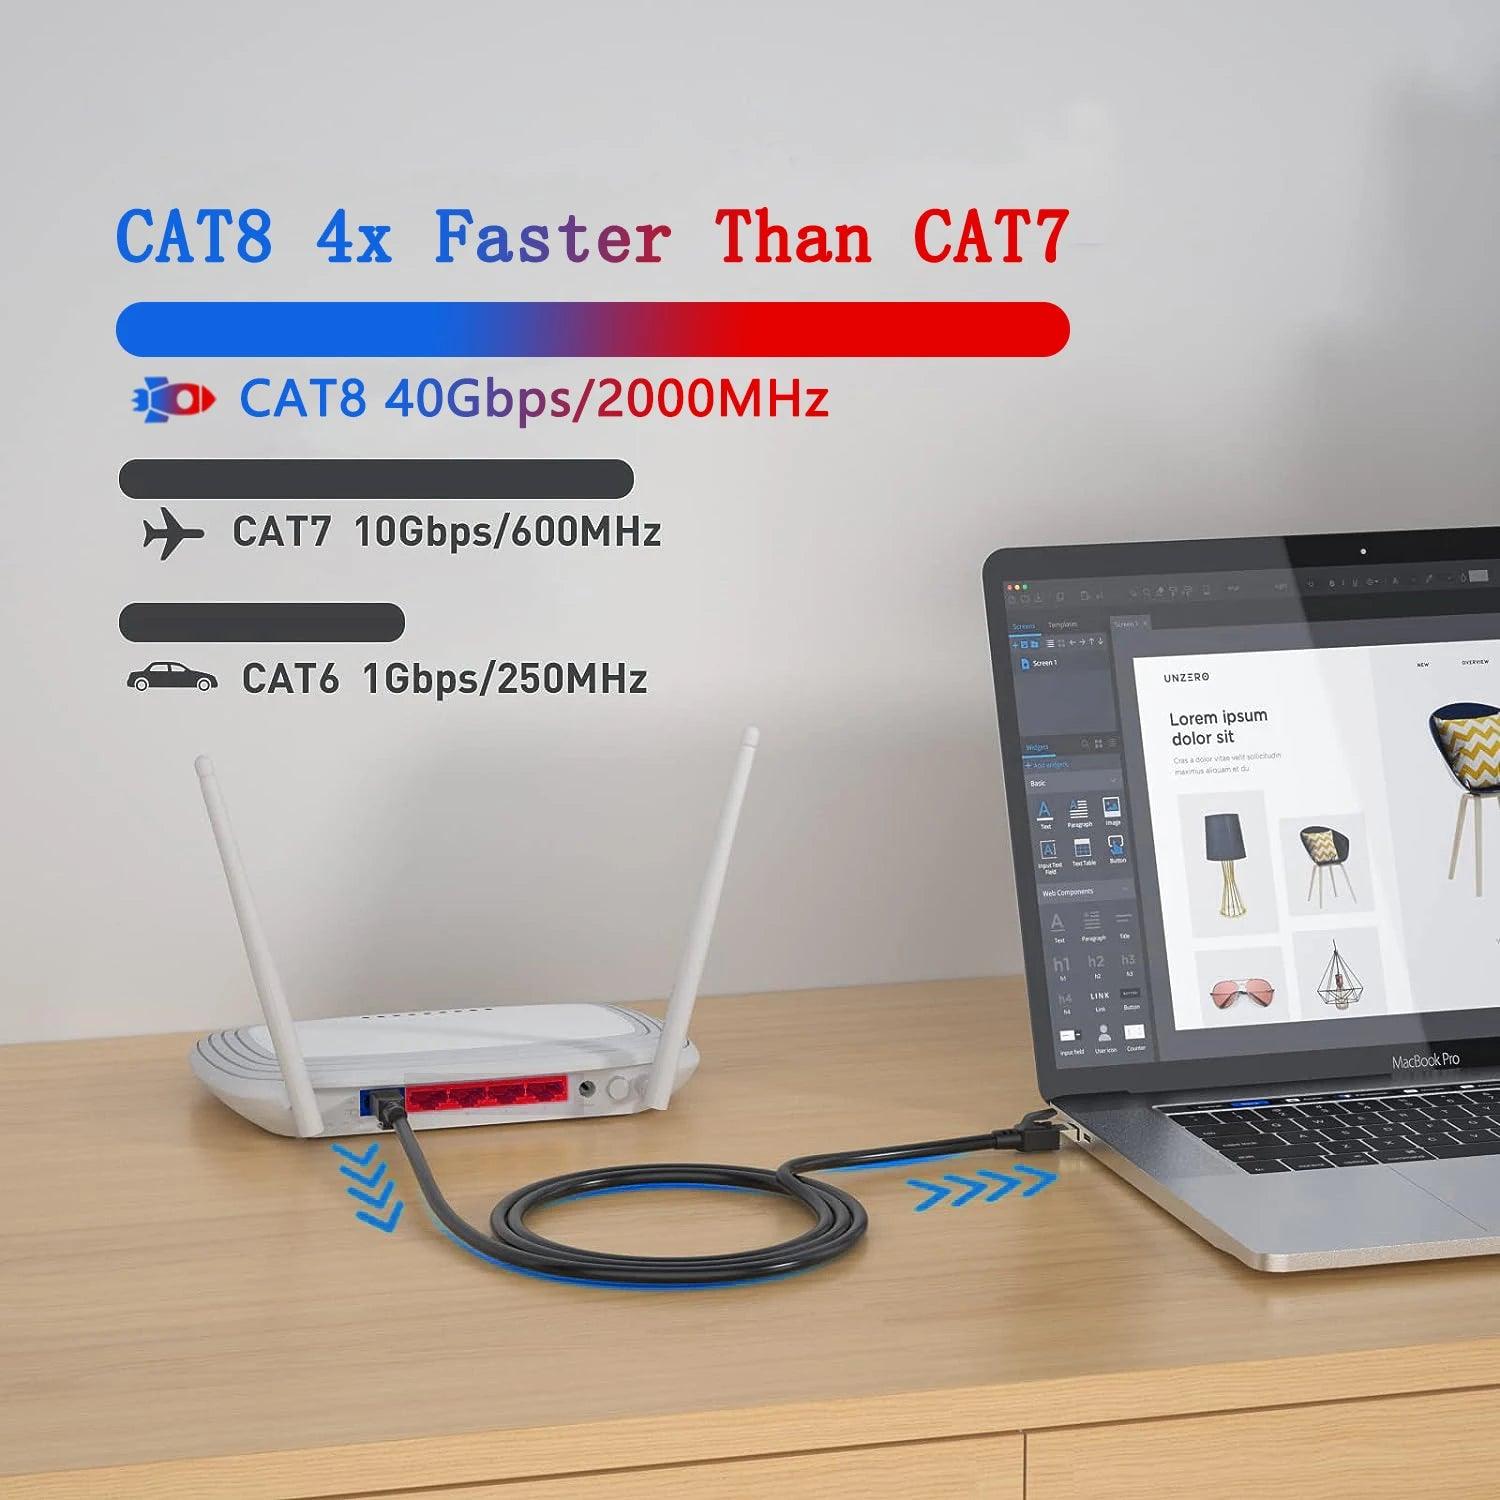 Superior Performance CAT8 Ethernet Cable - 40Gbps 2000MHz RJ45 10M 20M 30M Patch Cord for Modem Router - Hyper Speed Data Transmission - Waterproof & Flexible - Gold Plated Connectors - Universal Compatibility  ourlum.com   